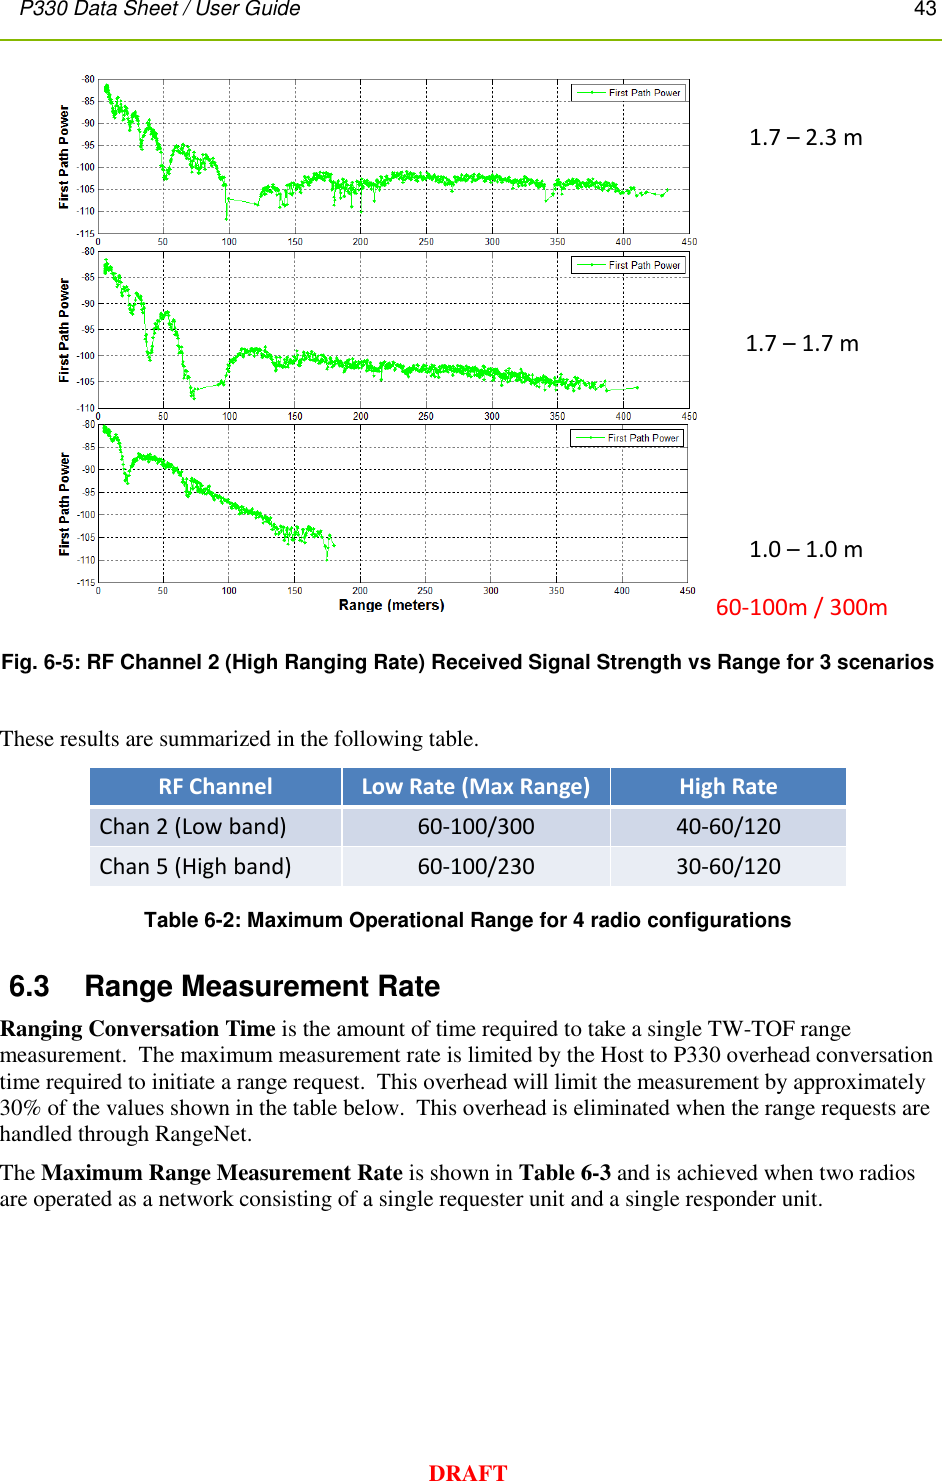 P330 Data Sheet / User Guide       43        DRAFT  Fig. 6-5: RF Channel 2 (High Ranging Rate) Received Signal Strength vs Range for 3 scenarios  These results are summarized in the following table.  Table 6-2: Maximum Operational Range for 4 radio configurations 6.3  Range Measurement Rate Ranging Conversation Time is the amount of time required to take a single TW-TOF range measurement.  The maximum measurement rate is limited by the Host to P330 overhead conversation time required to initiate a range request.  This overhead will limit the measurement by approximately 30% of the values shown in the table below.  This overhead is eliminated when the range requests are handled through RangeNet.   The Maximum Range Measurement Rate is shown in Table 6-3 and is achieved when two radios are operated as a network consisting of a single requester unit and a single responder unit.    1.0 –1.0 m1.7 –1.7 m1.7 –2.3 m60-100m / 300mRF Channel Low Rate (Max Range) High RateChan 2 (Low band) 60-100/300 40-60/120Chan 5 (High band) 60-100/230 30-60/120